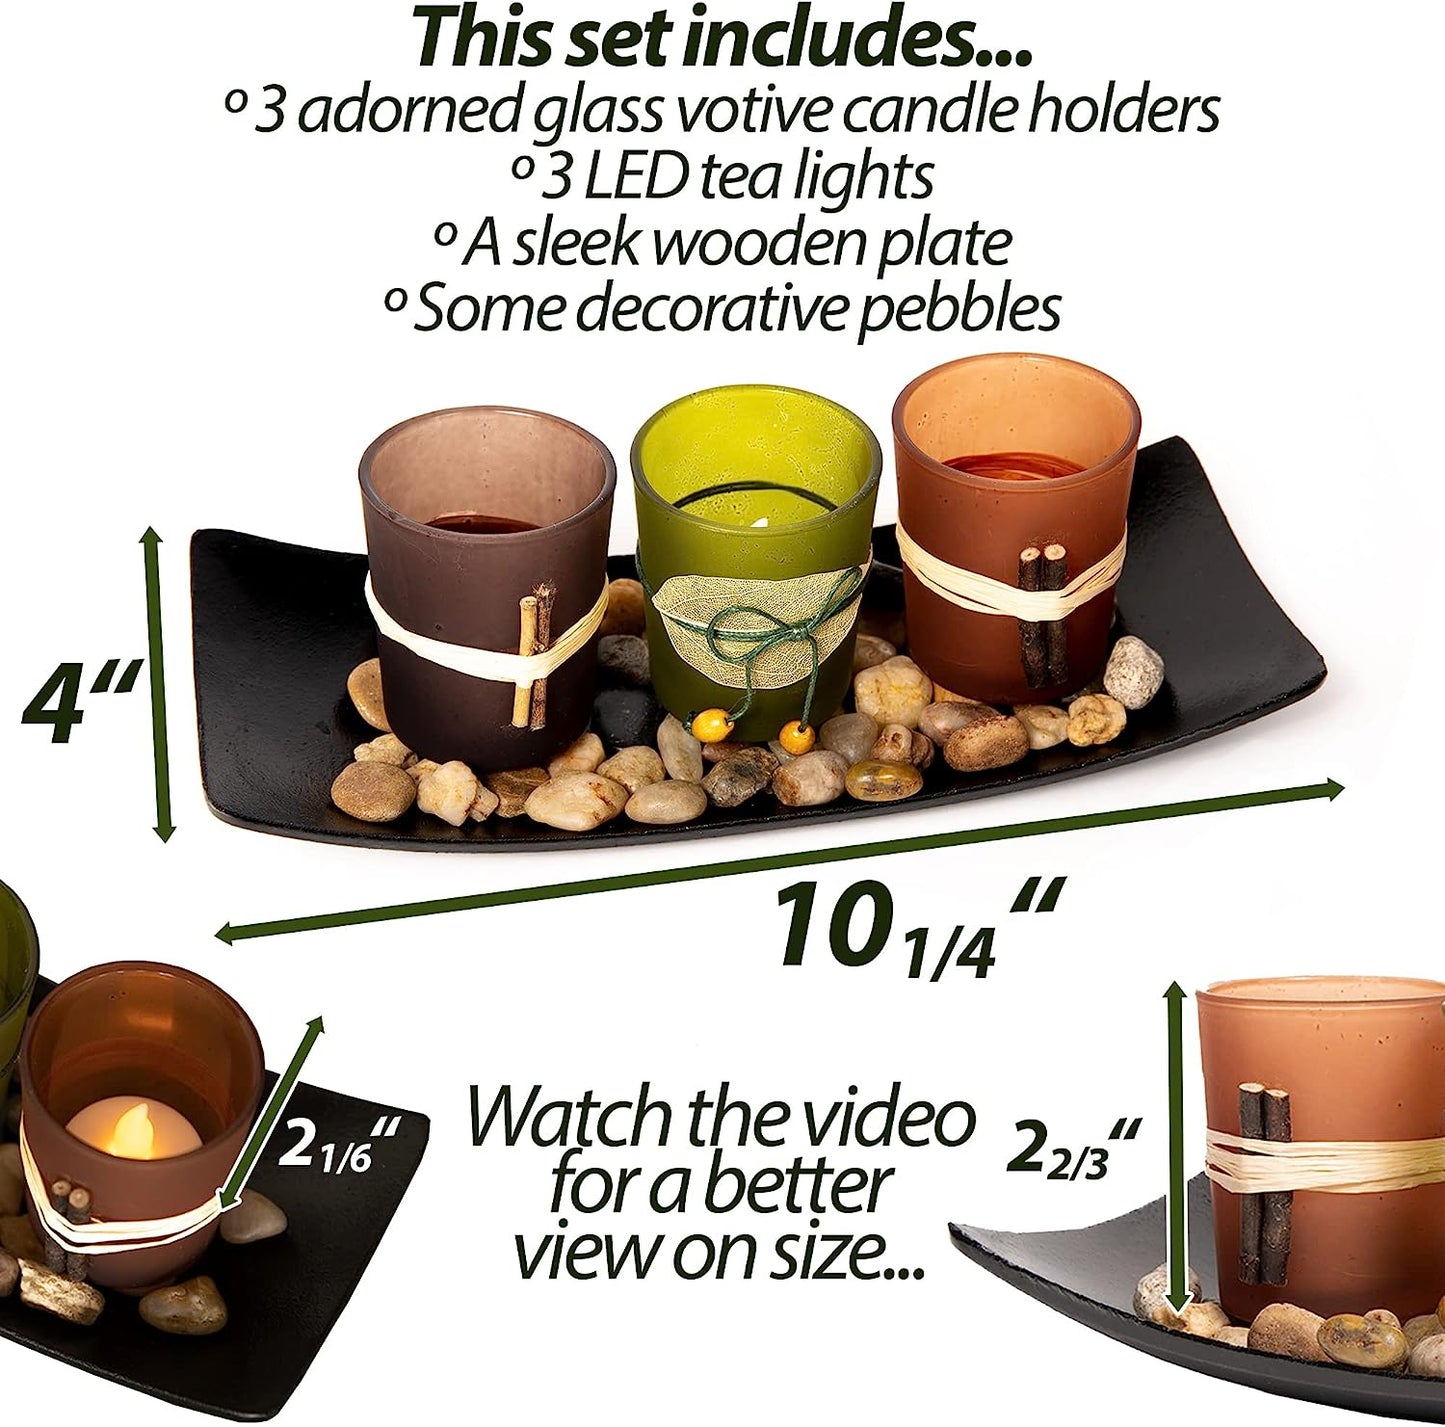 Vintage Votive Candle Holder Set: Dawhud Direct Flameless Natural Candlescape with 3 LED Tea Lights, Rocks, and Tray - Natural Earth Tones for Bath Decor, Zen Room, and Gift Giving